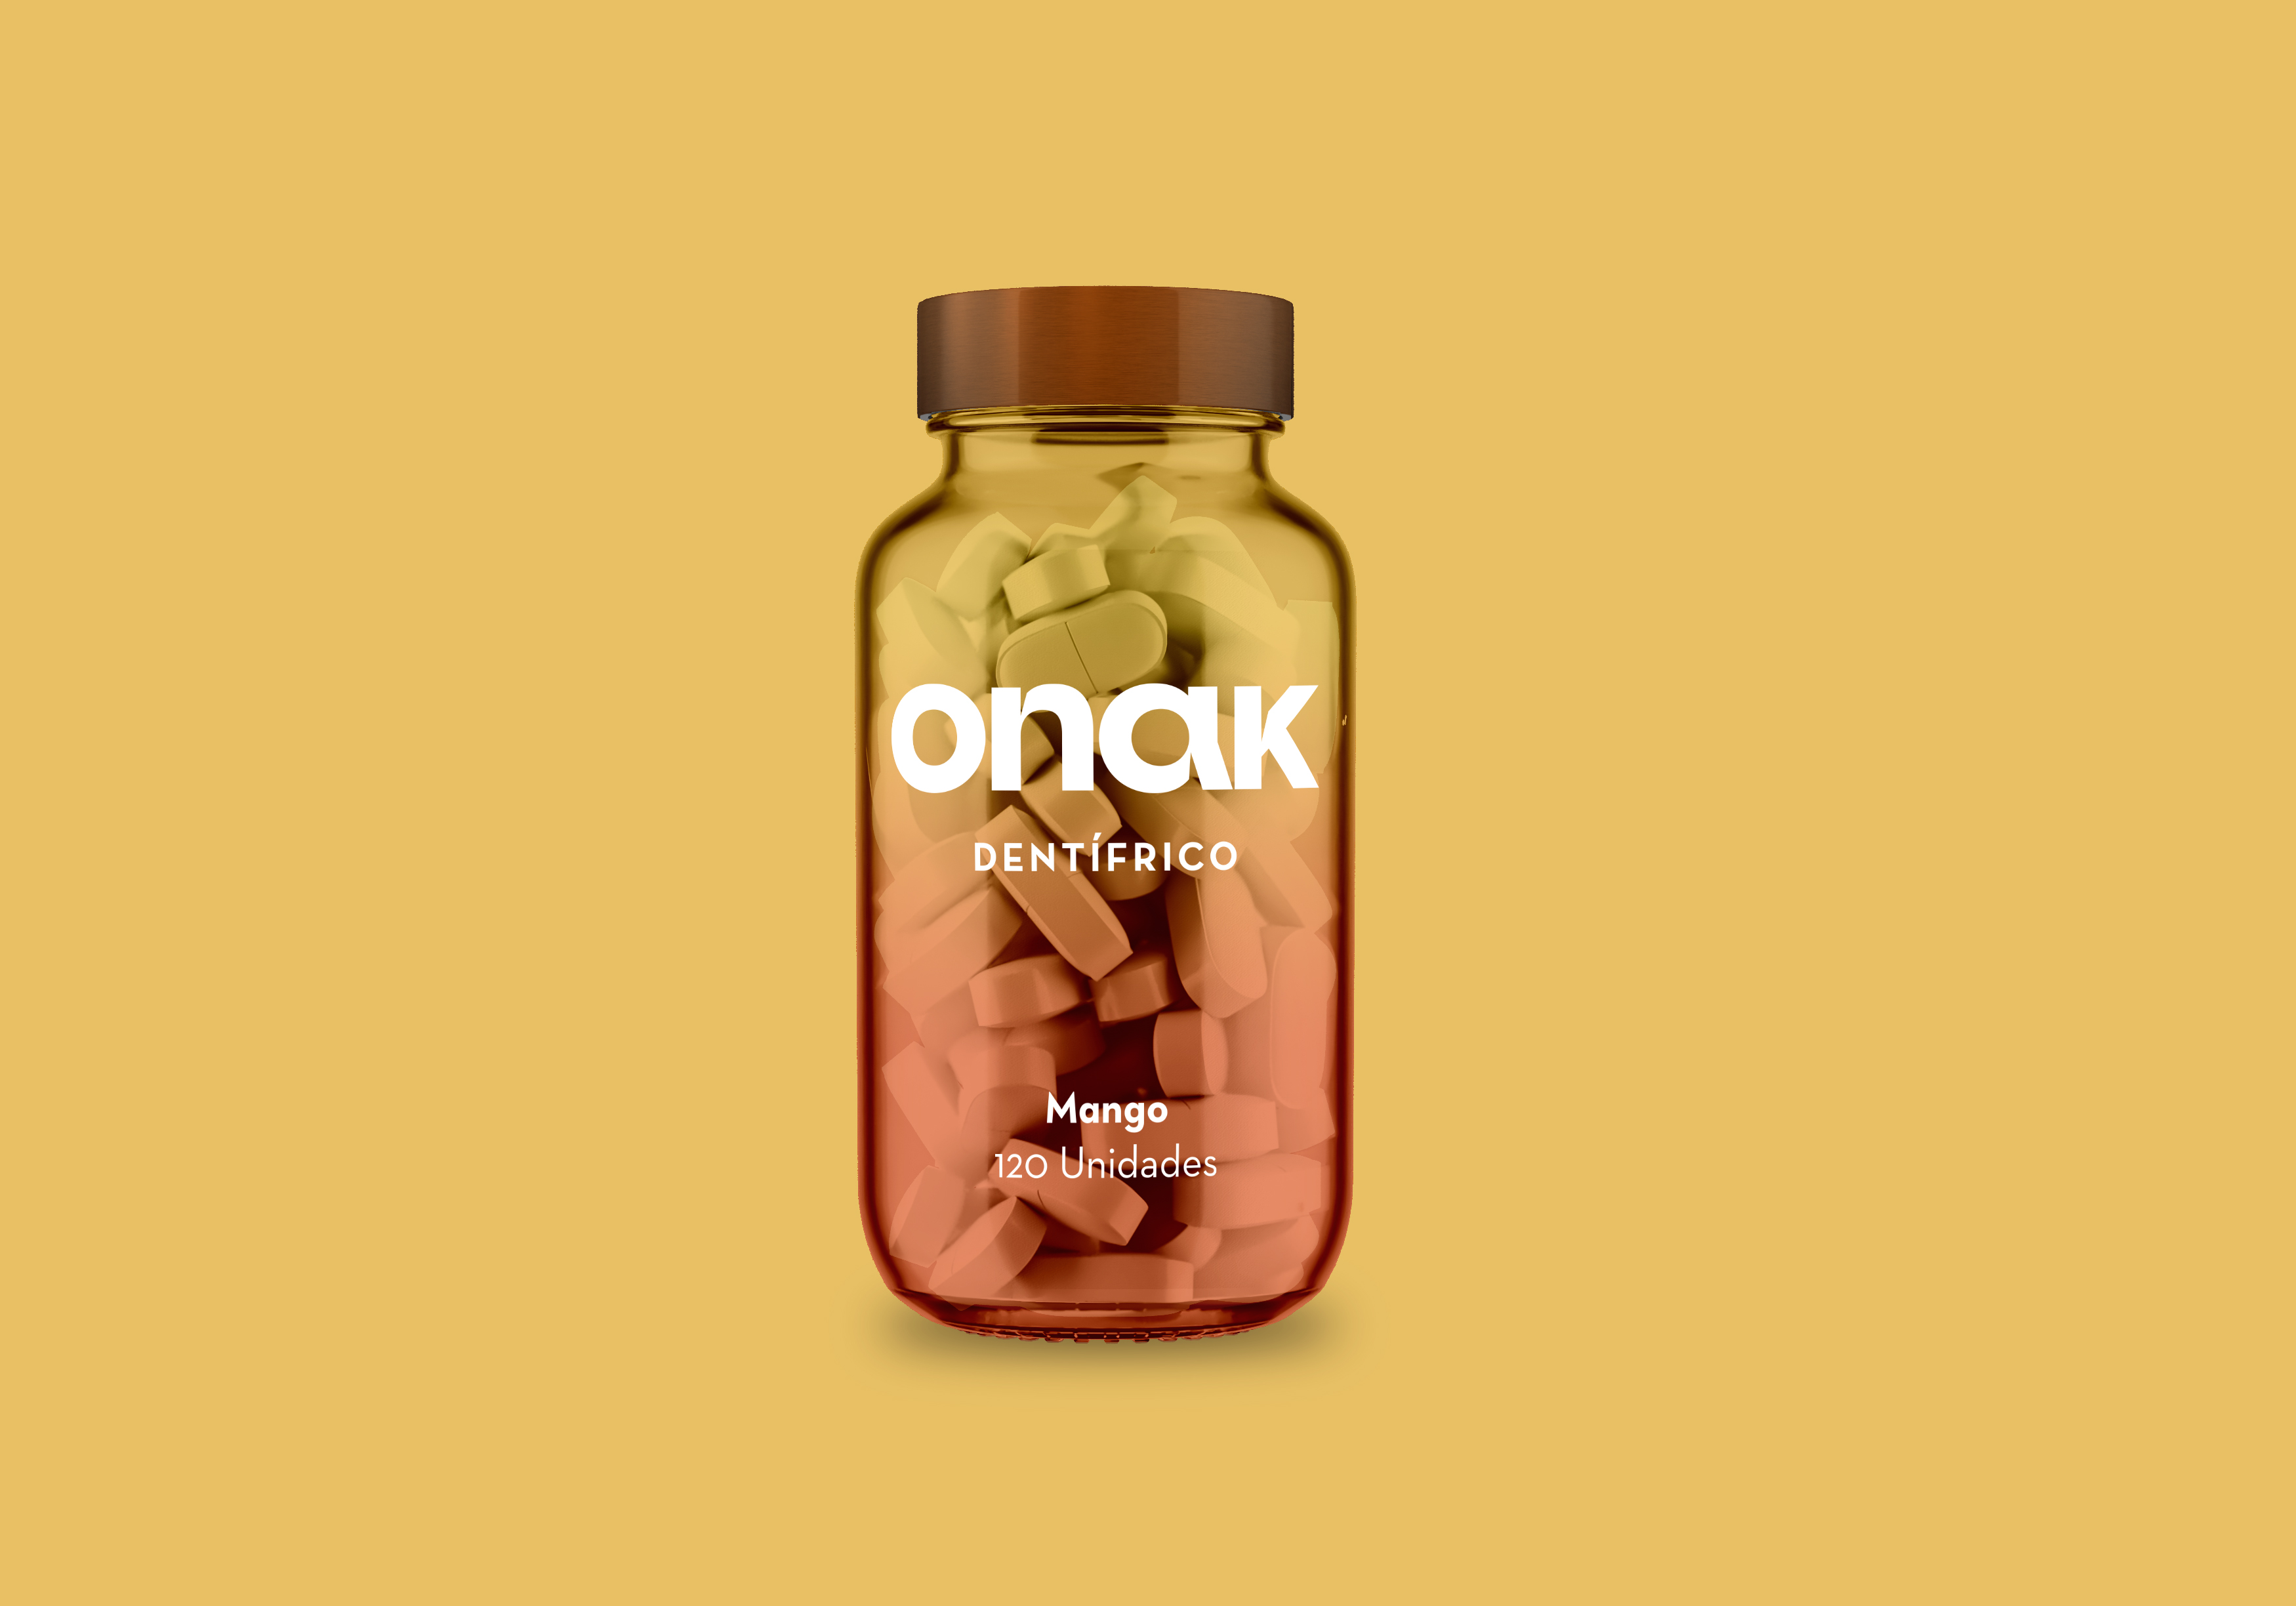 Onak, salud bucal by ideolab - Creative Work - $i